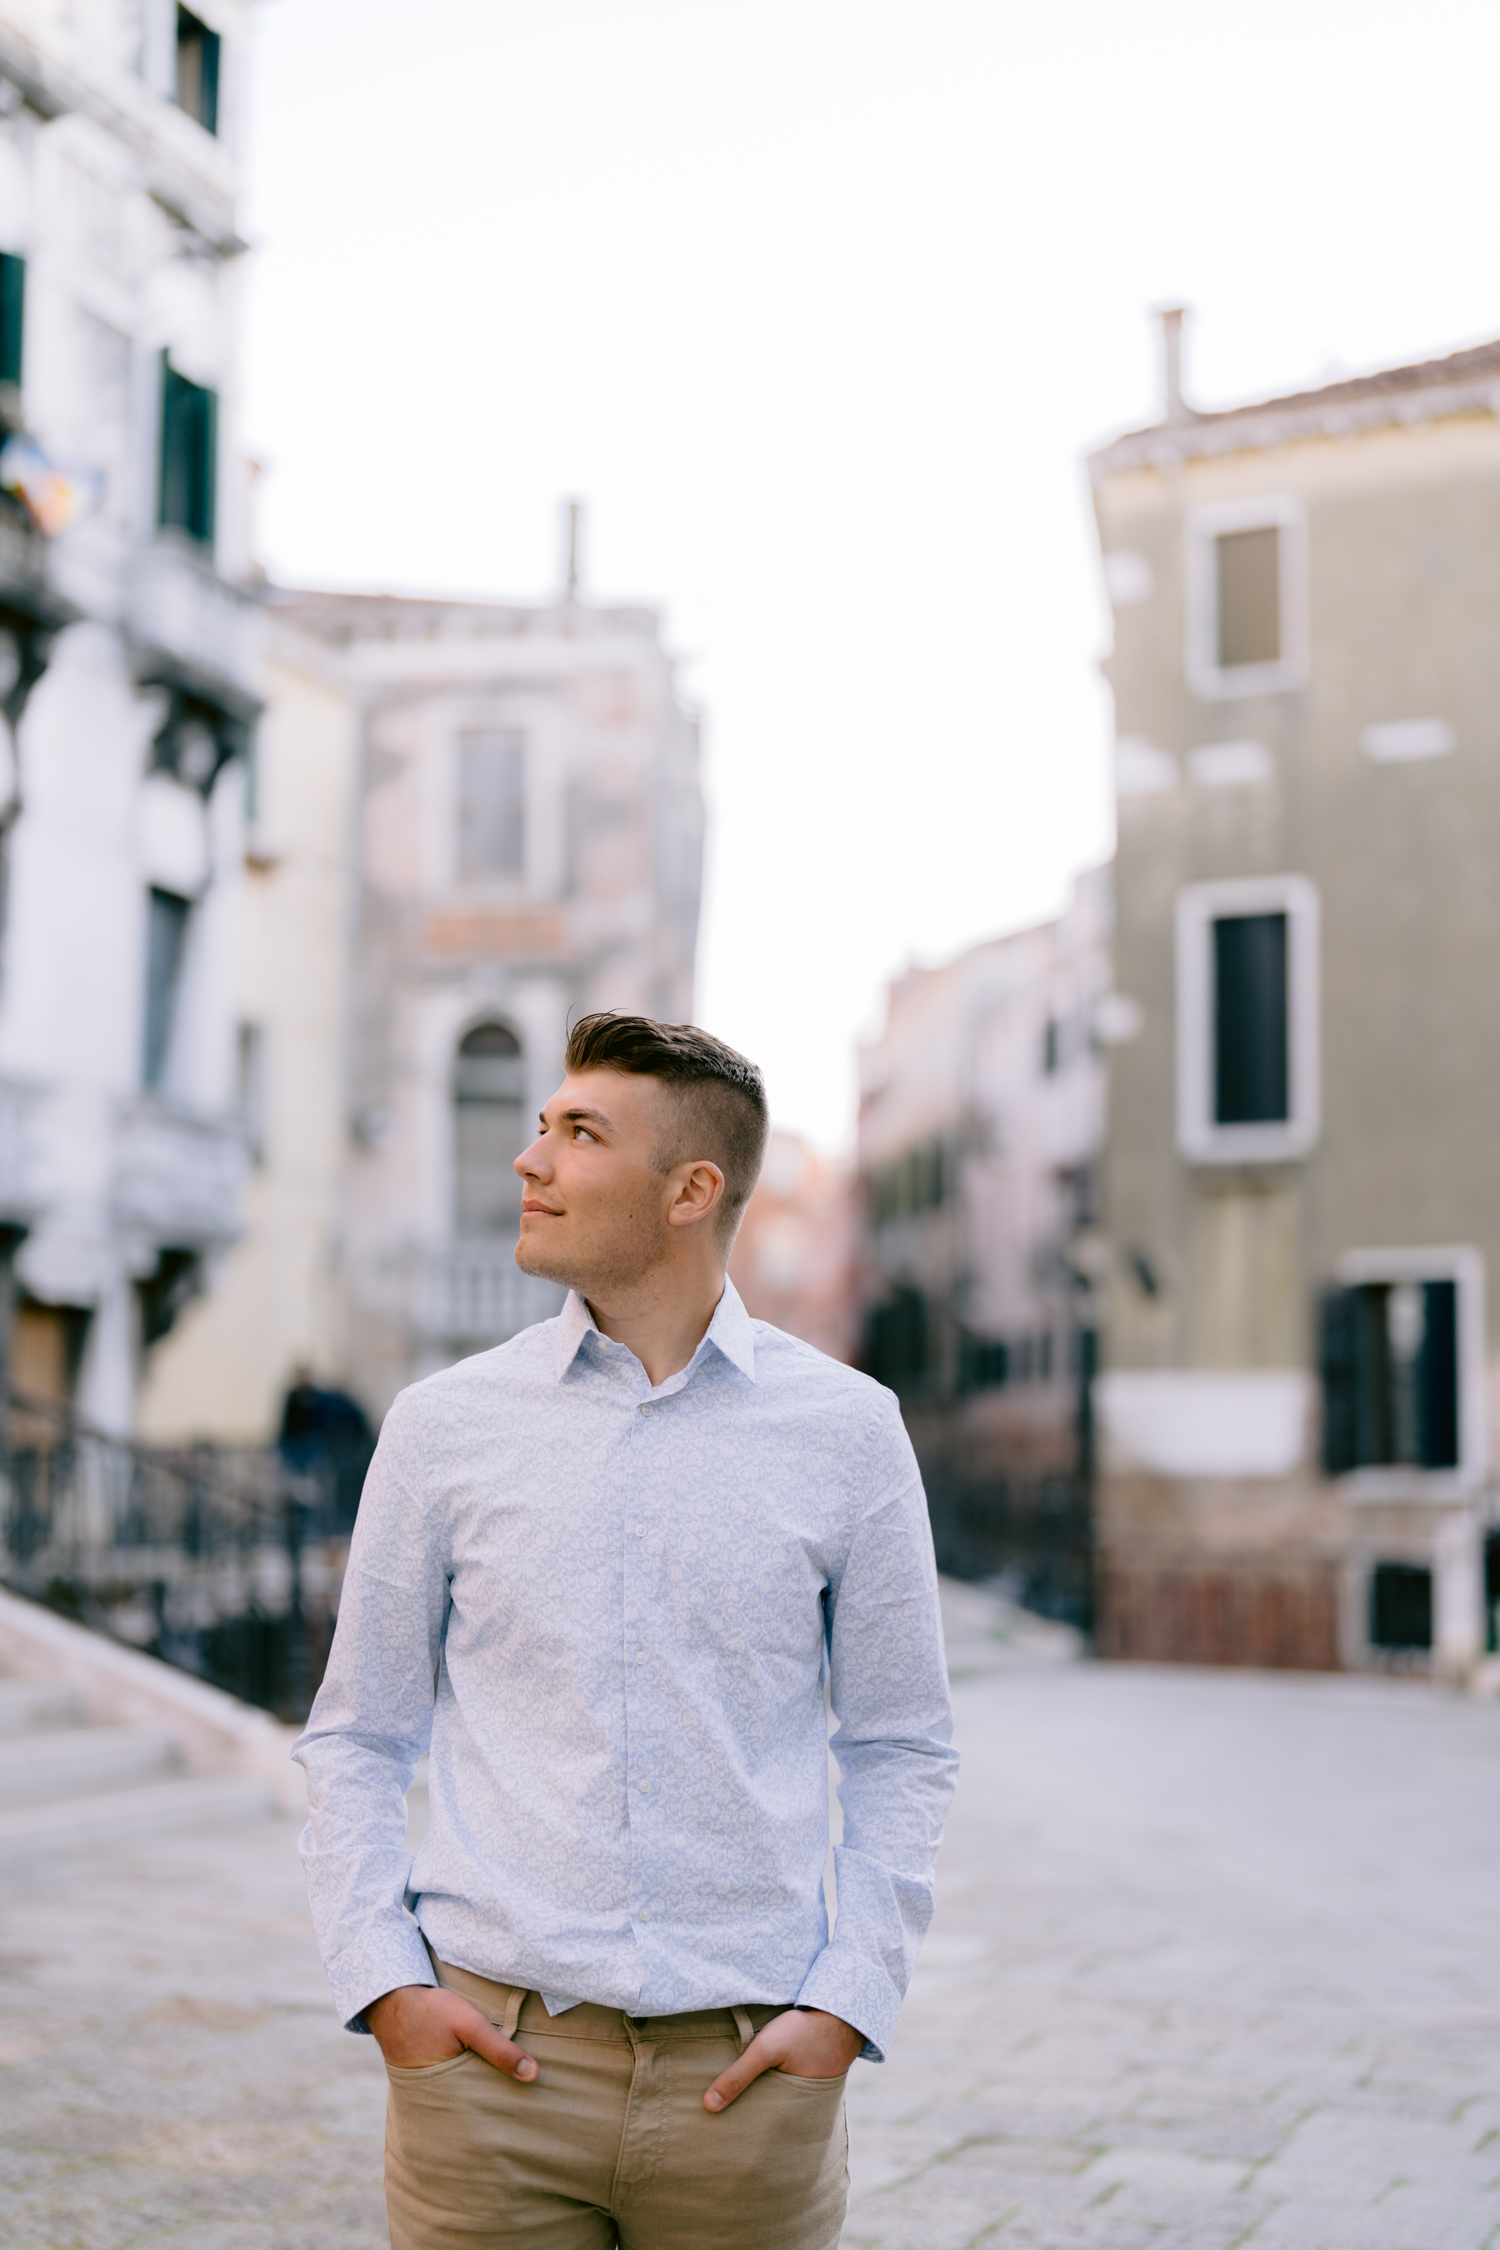 senior portrait photographer in Venice for a vacation photoshoot